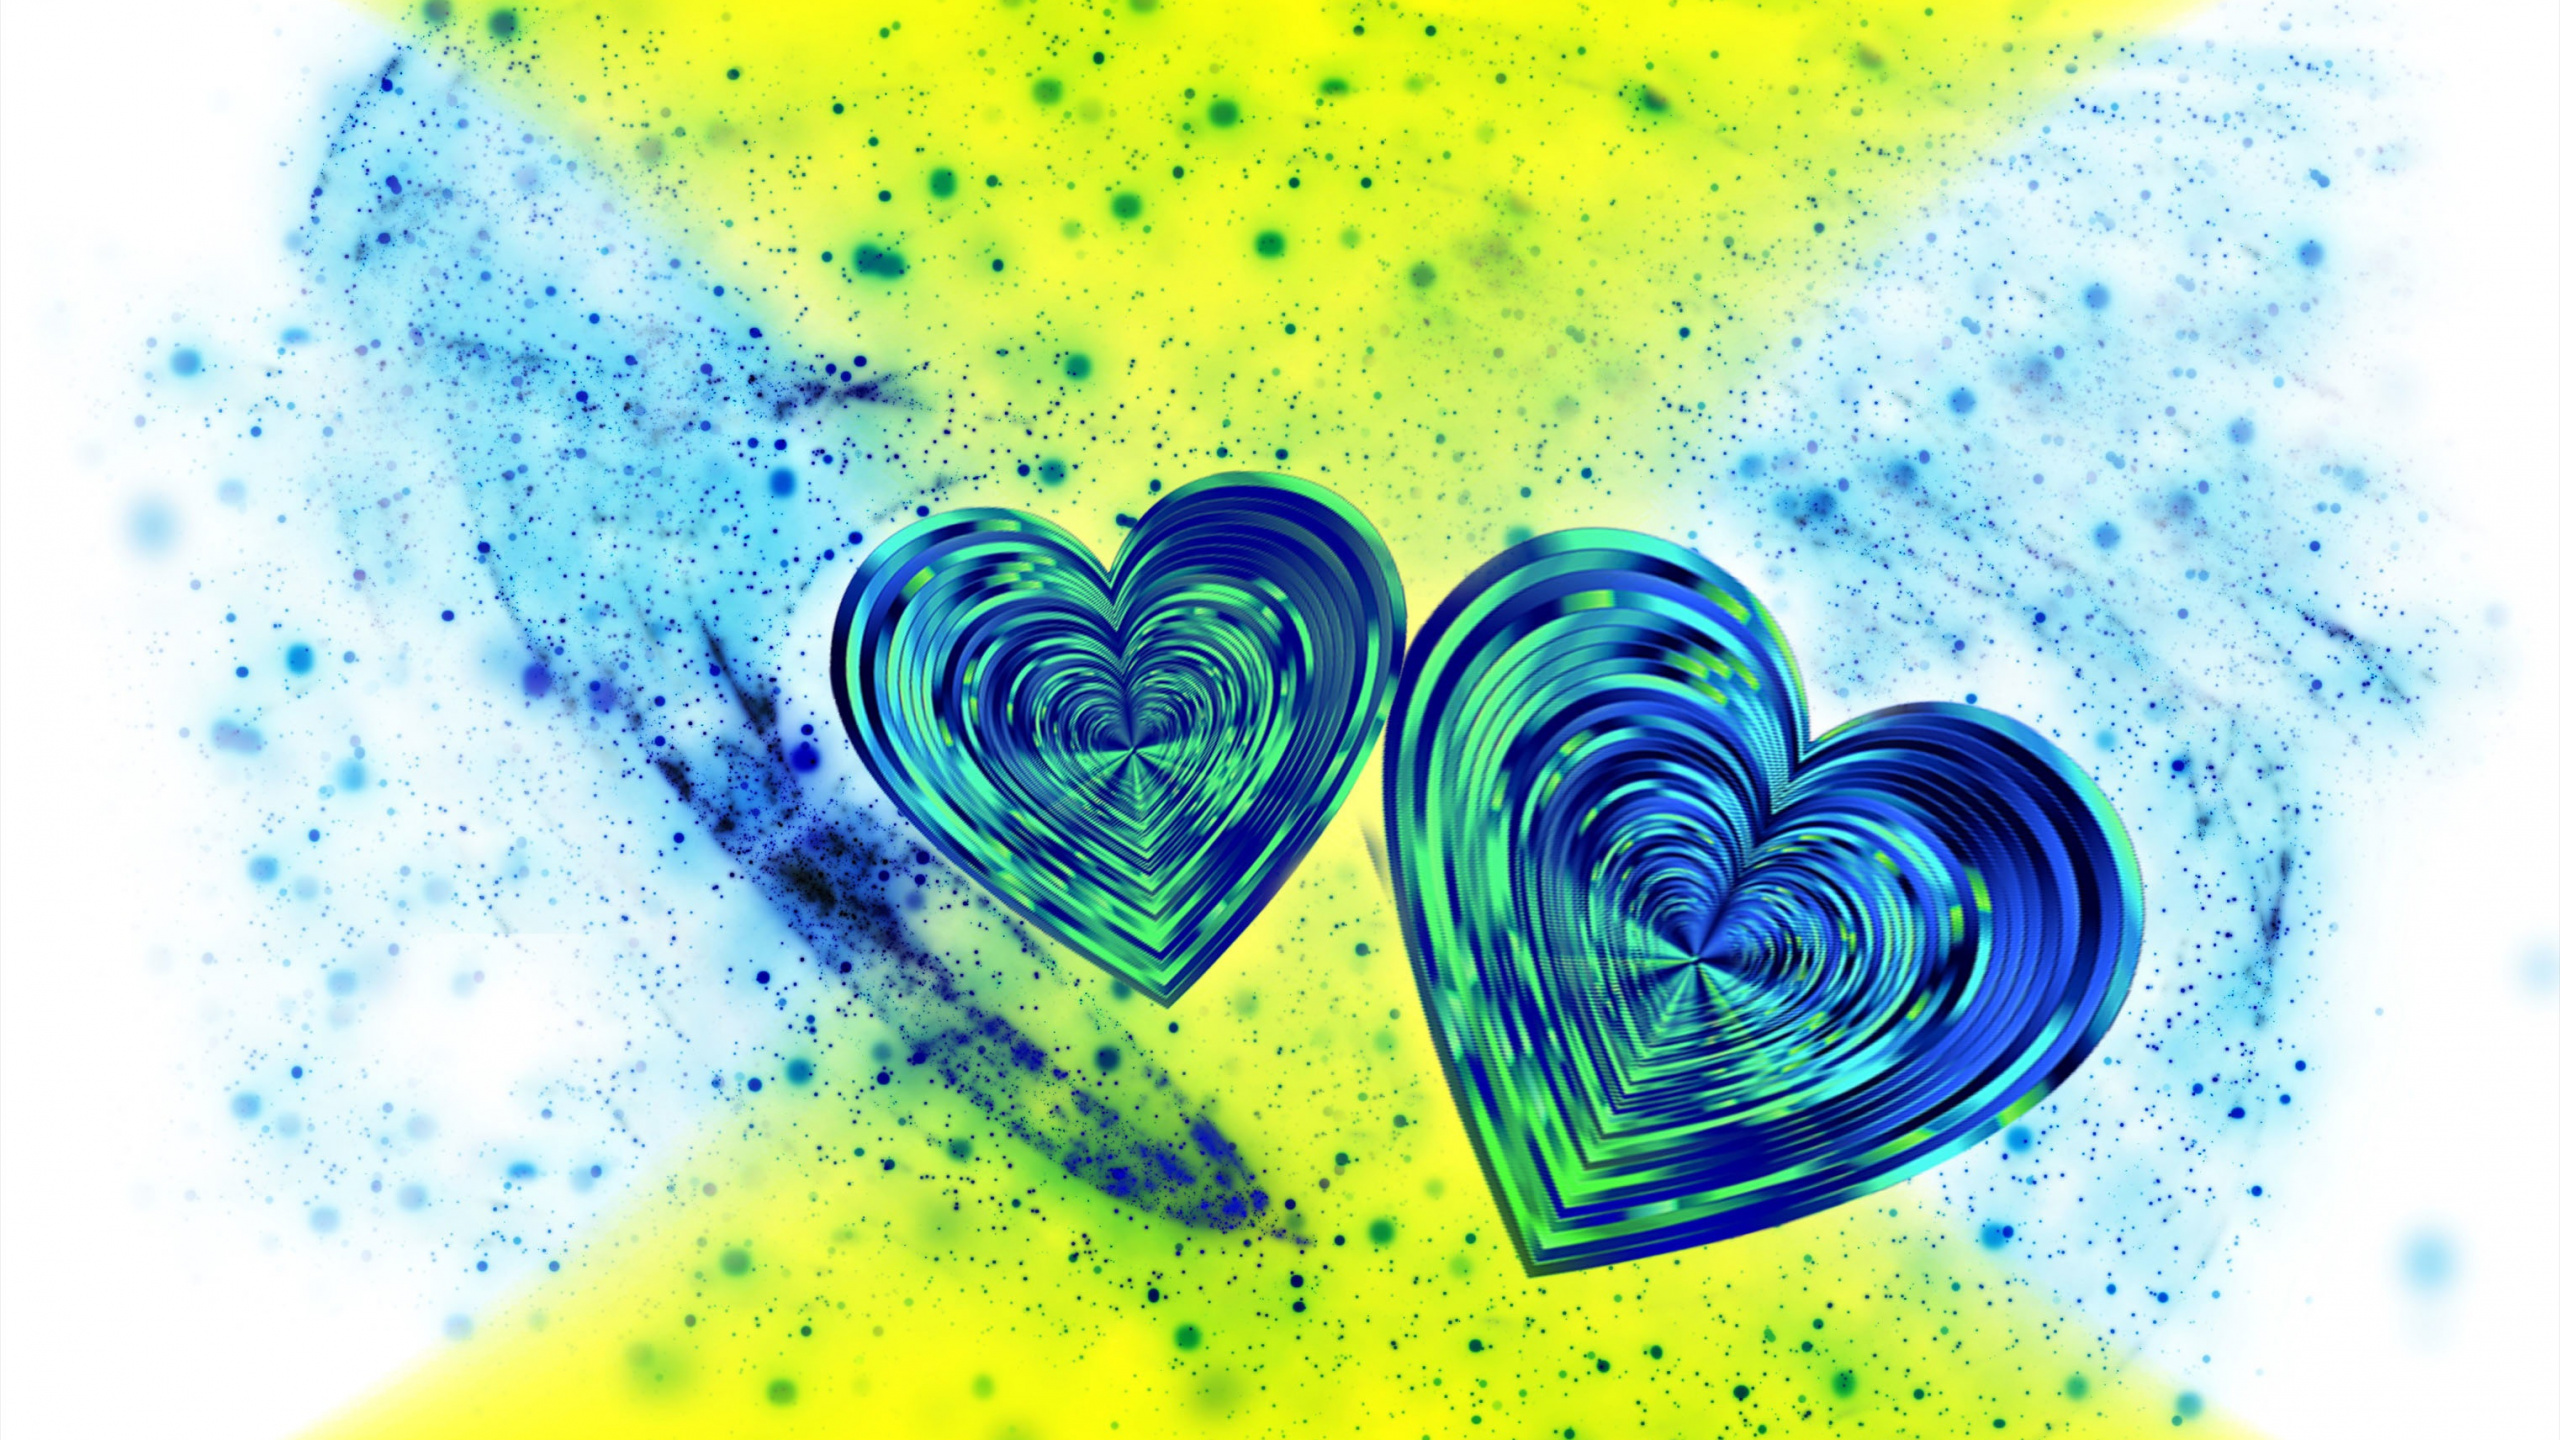 Abstract Art, Heart, Love, Graphic Design, Graphics. Wallpaper in 2560x1440 Resolution